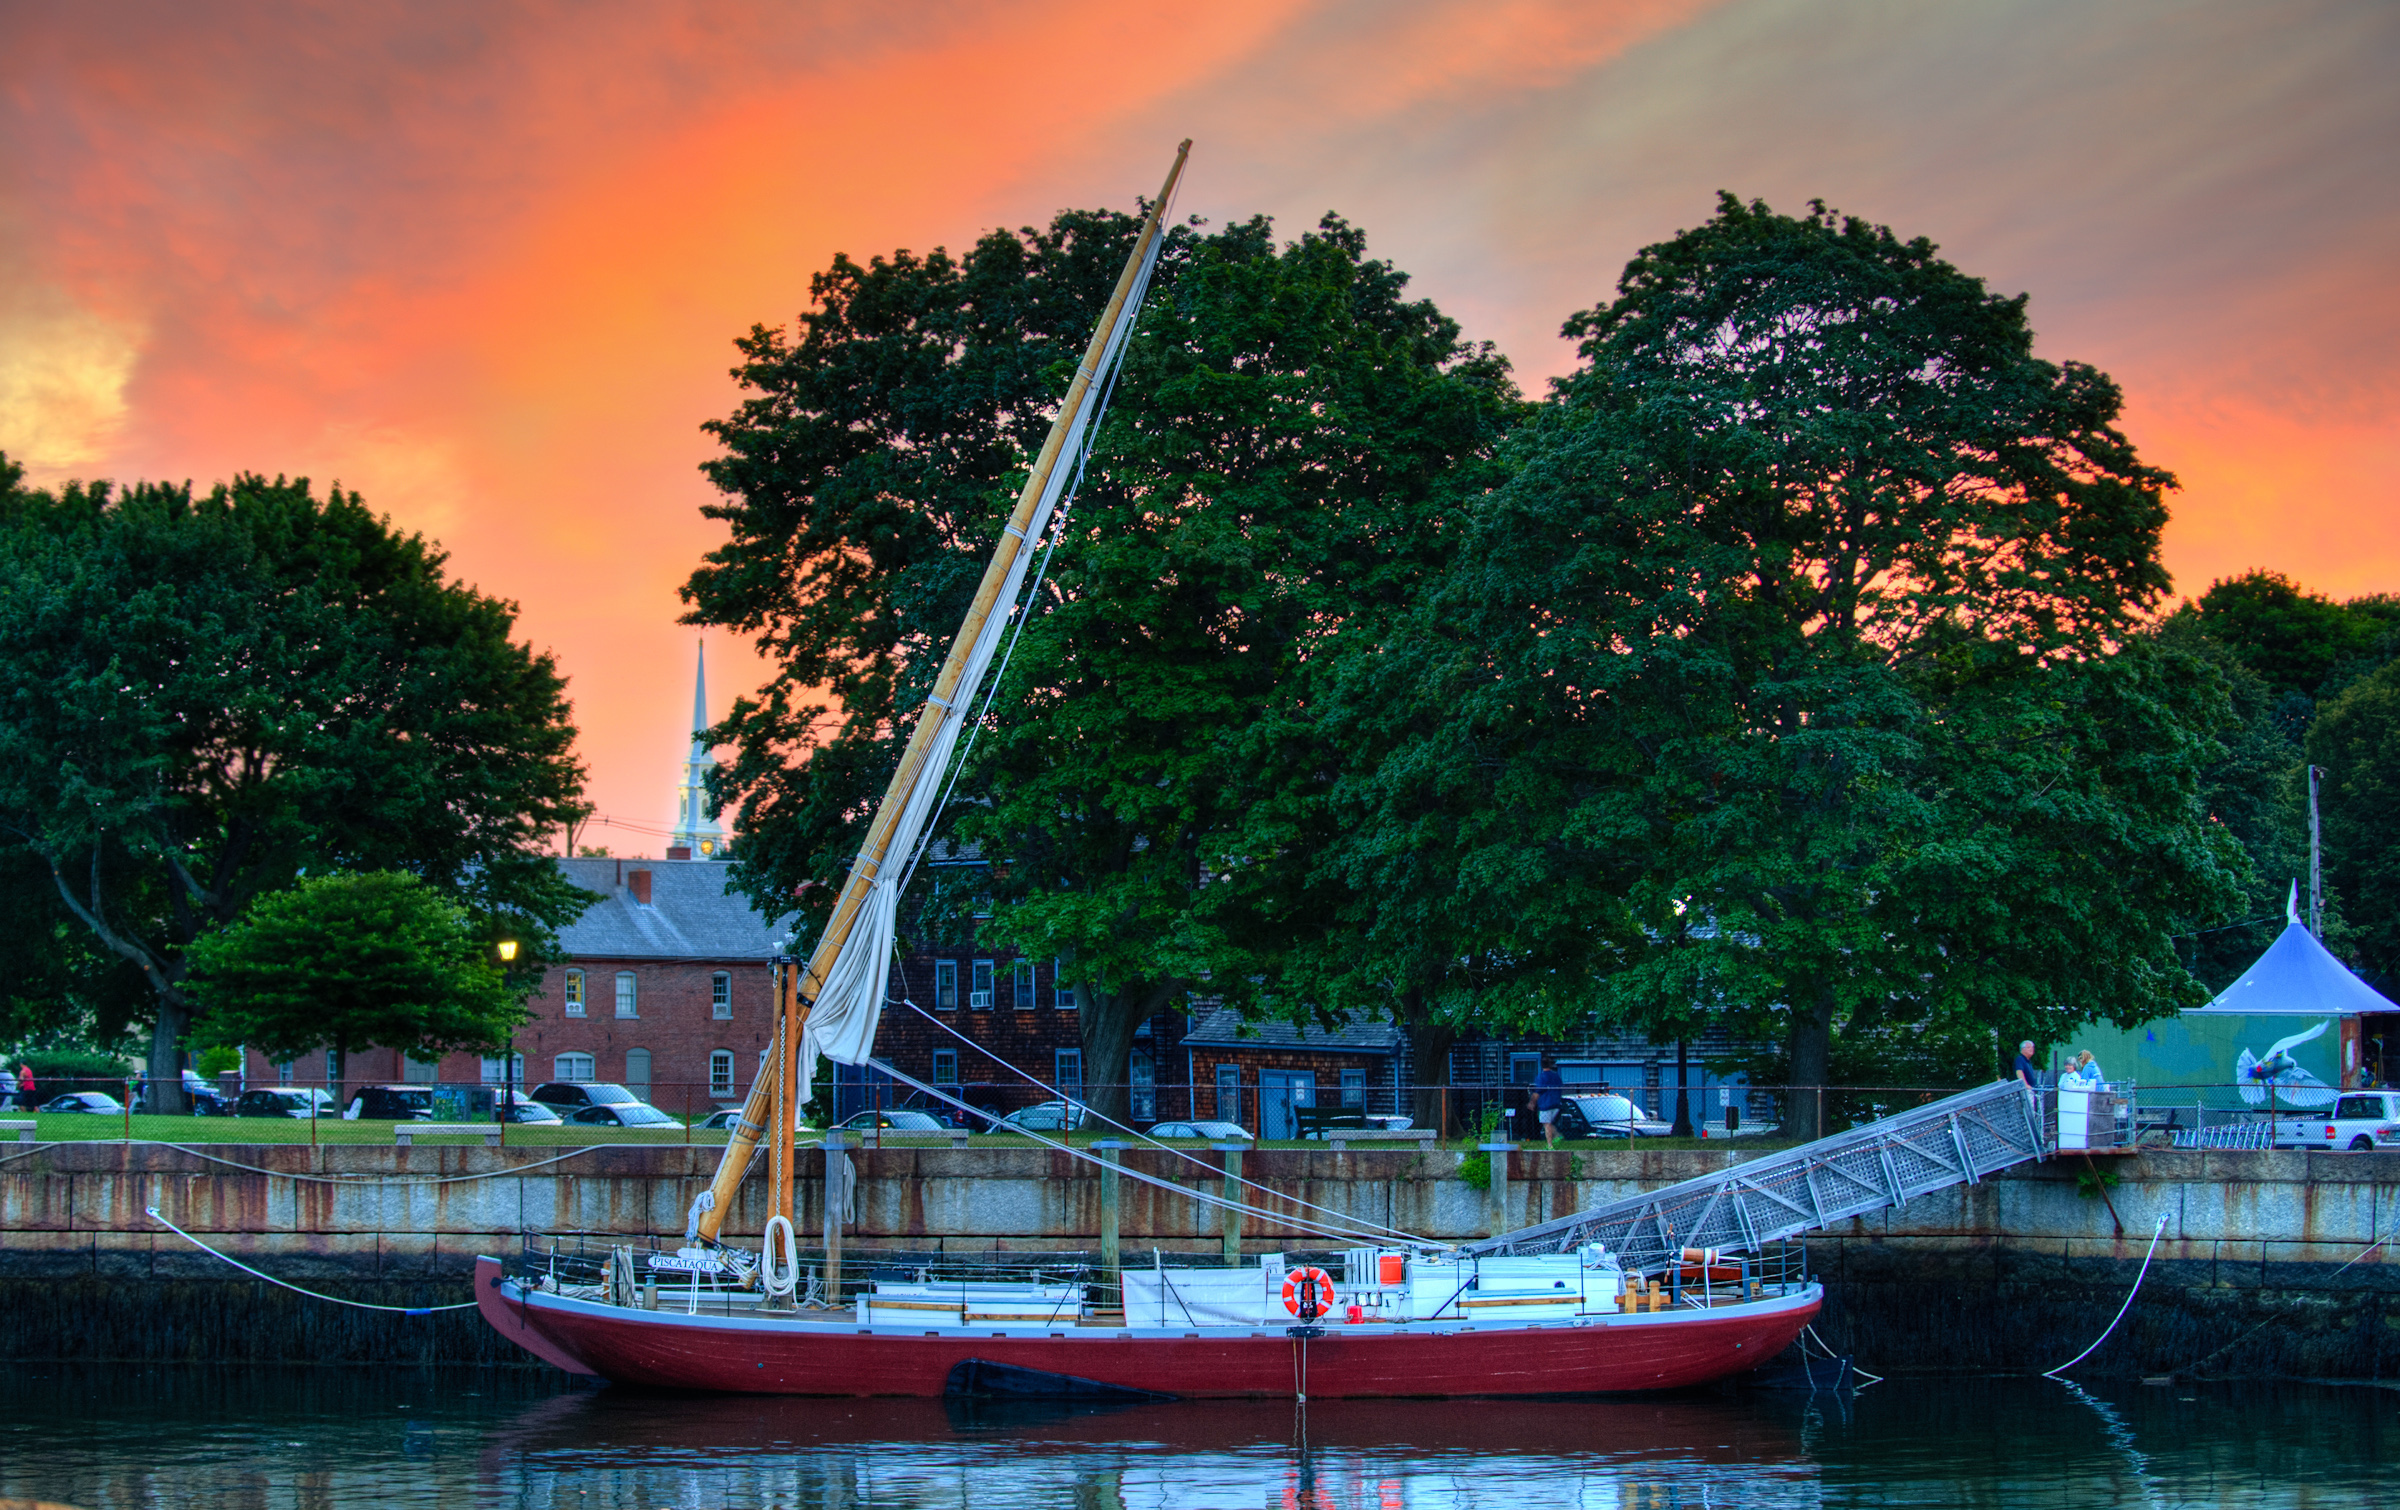 The gundalow Piscataqua sits docked in front of Prescott Park in Portsmouth NH at sunset. The steeple of the North Church is illuminated in the background by lights that have just come on.